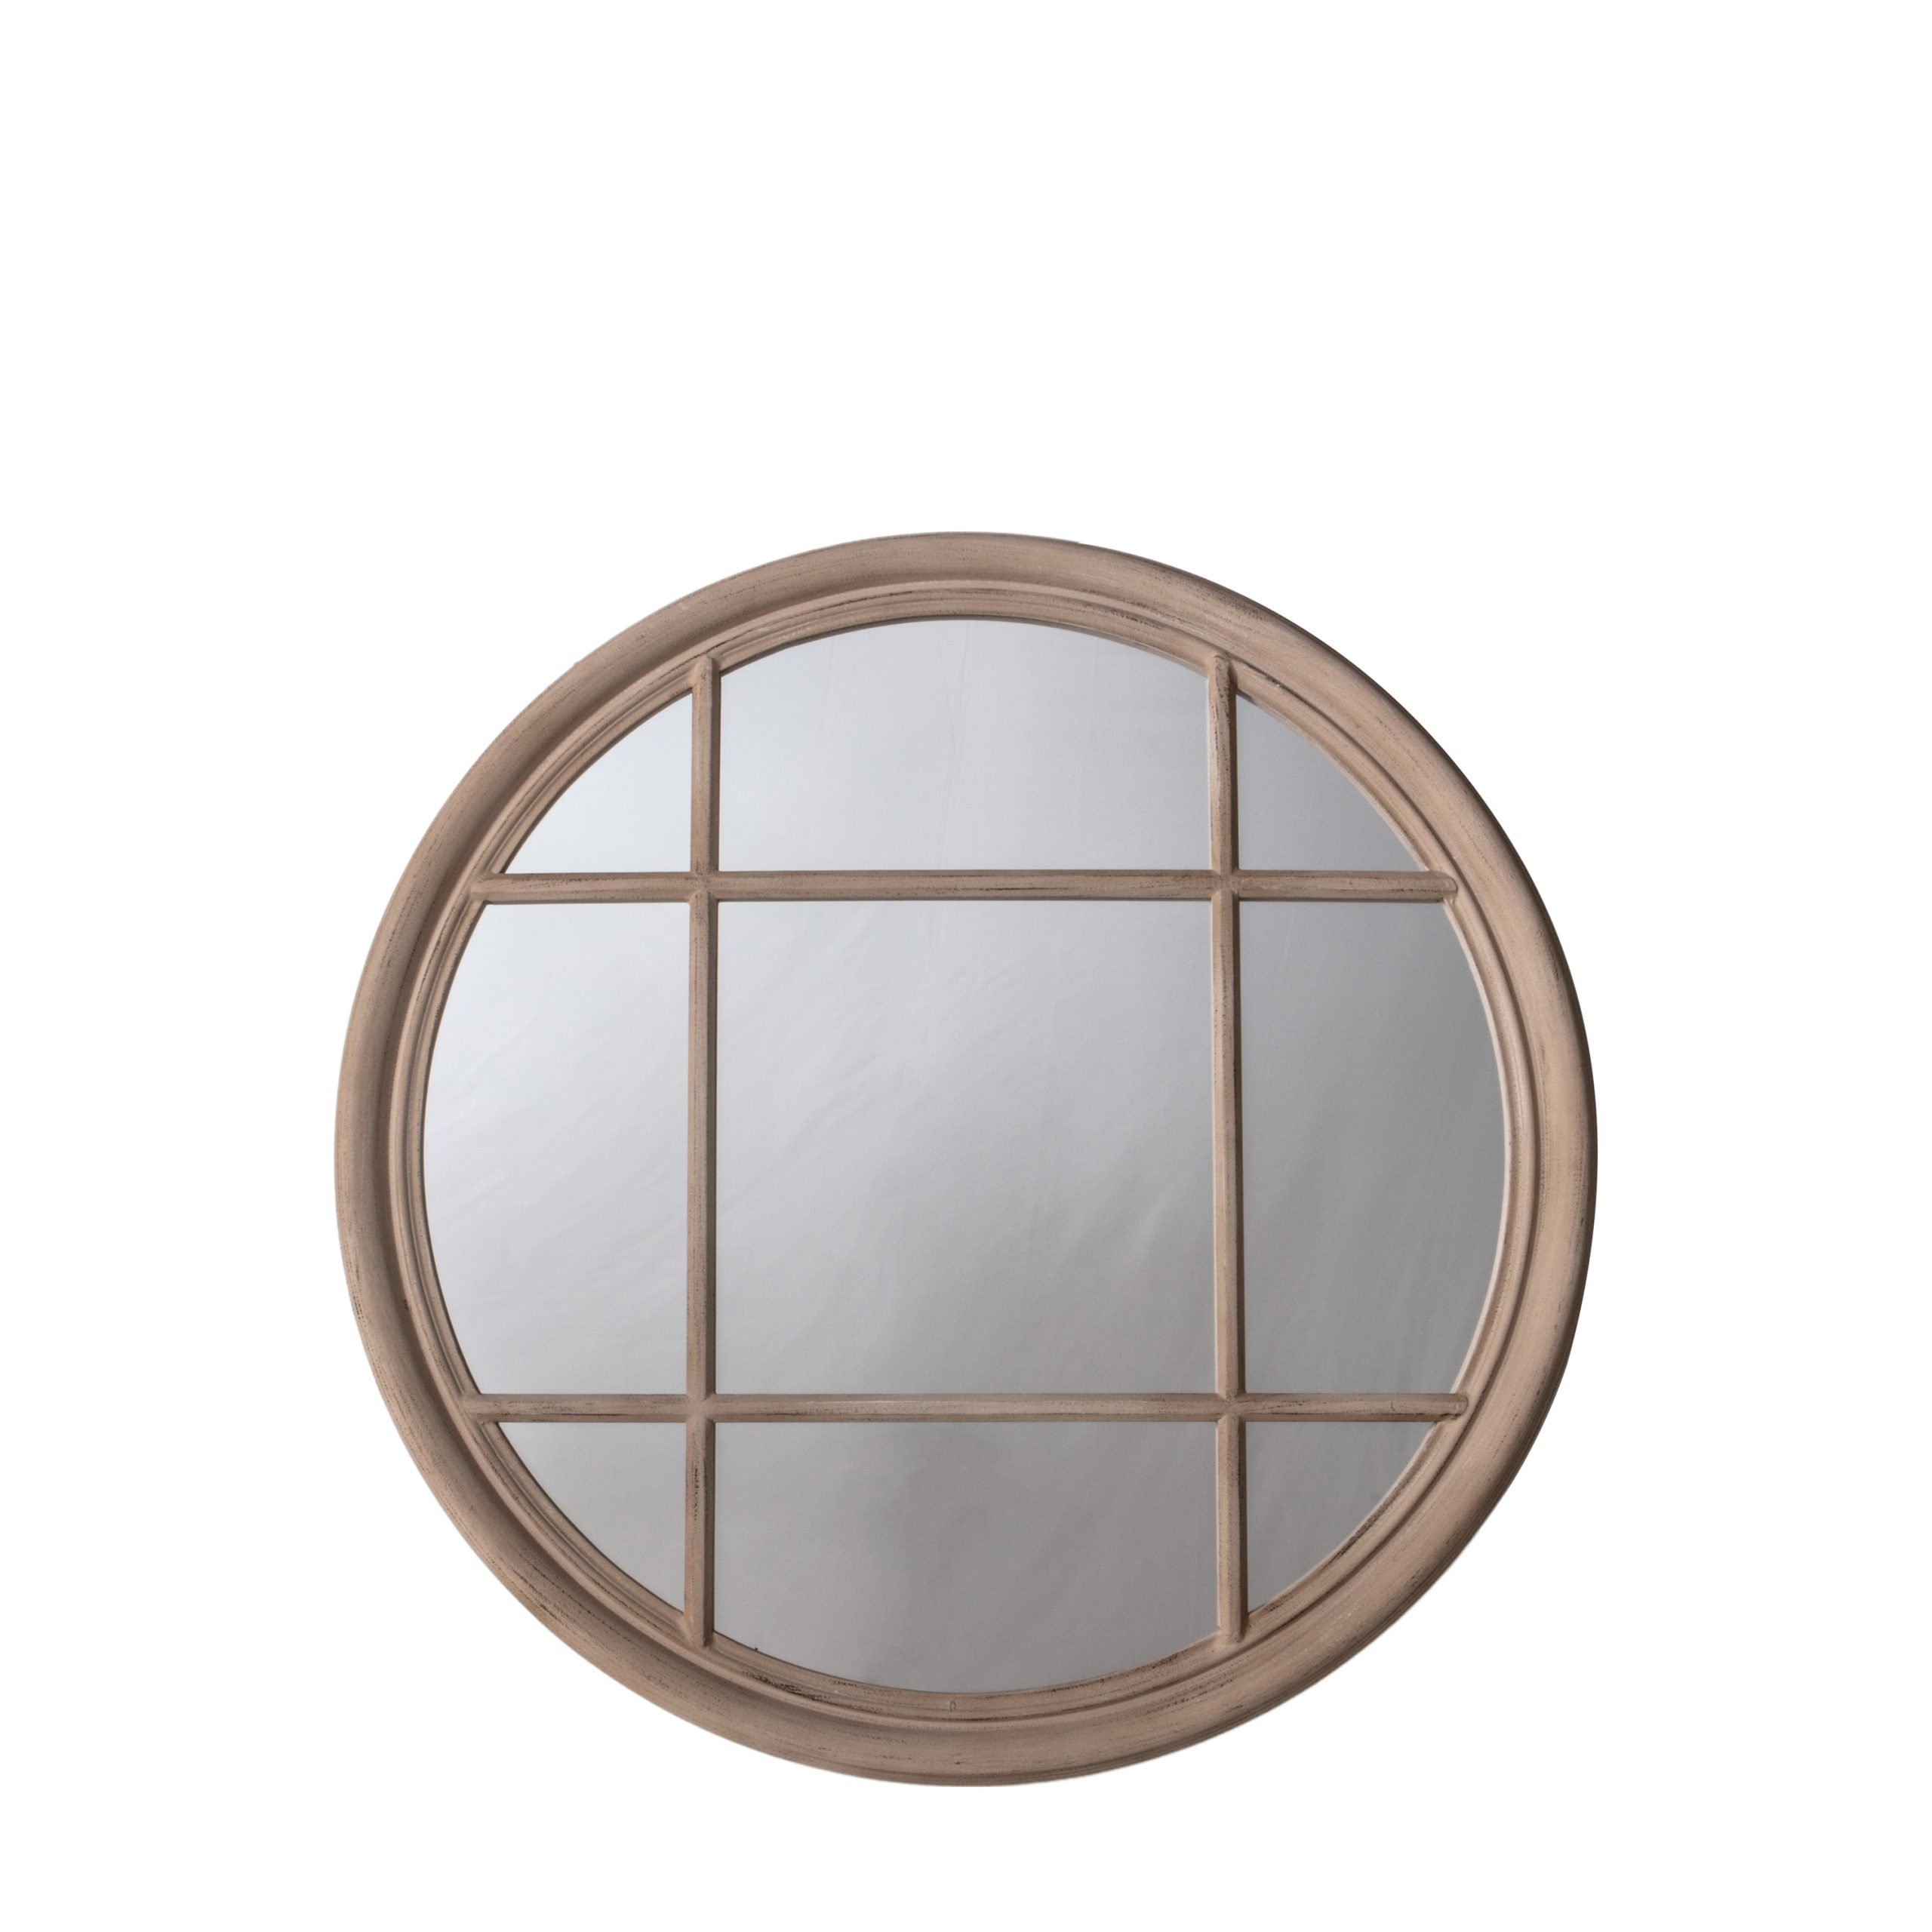 Gallery Direct Eccleston Round Mirror Clay | Shackletons